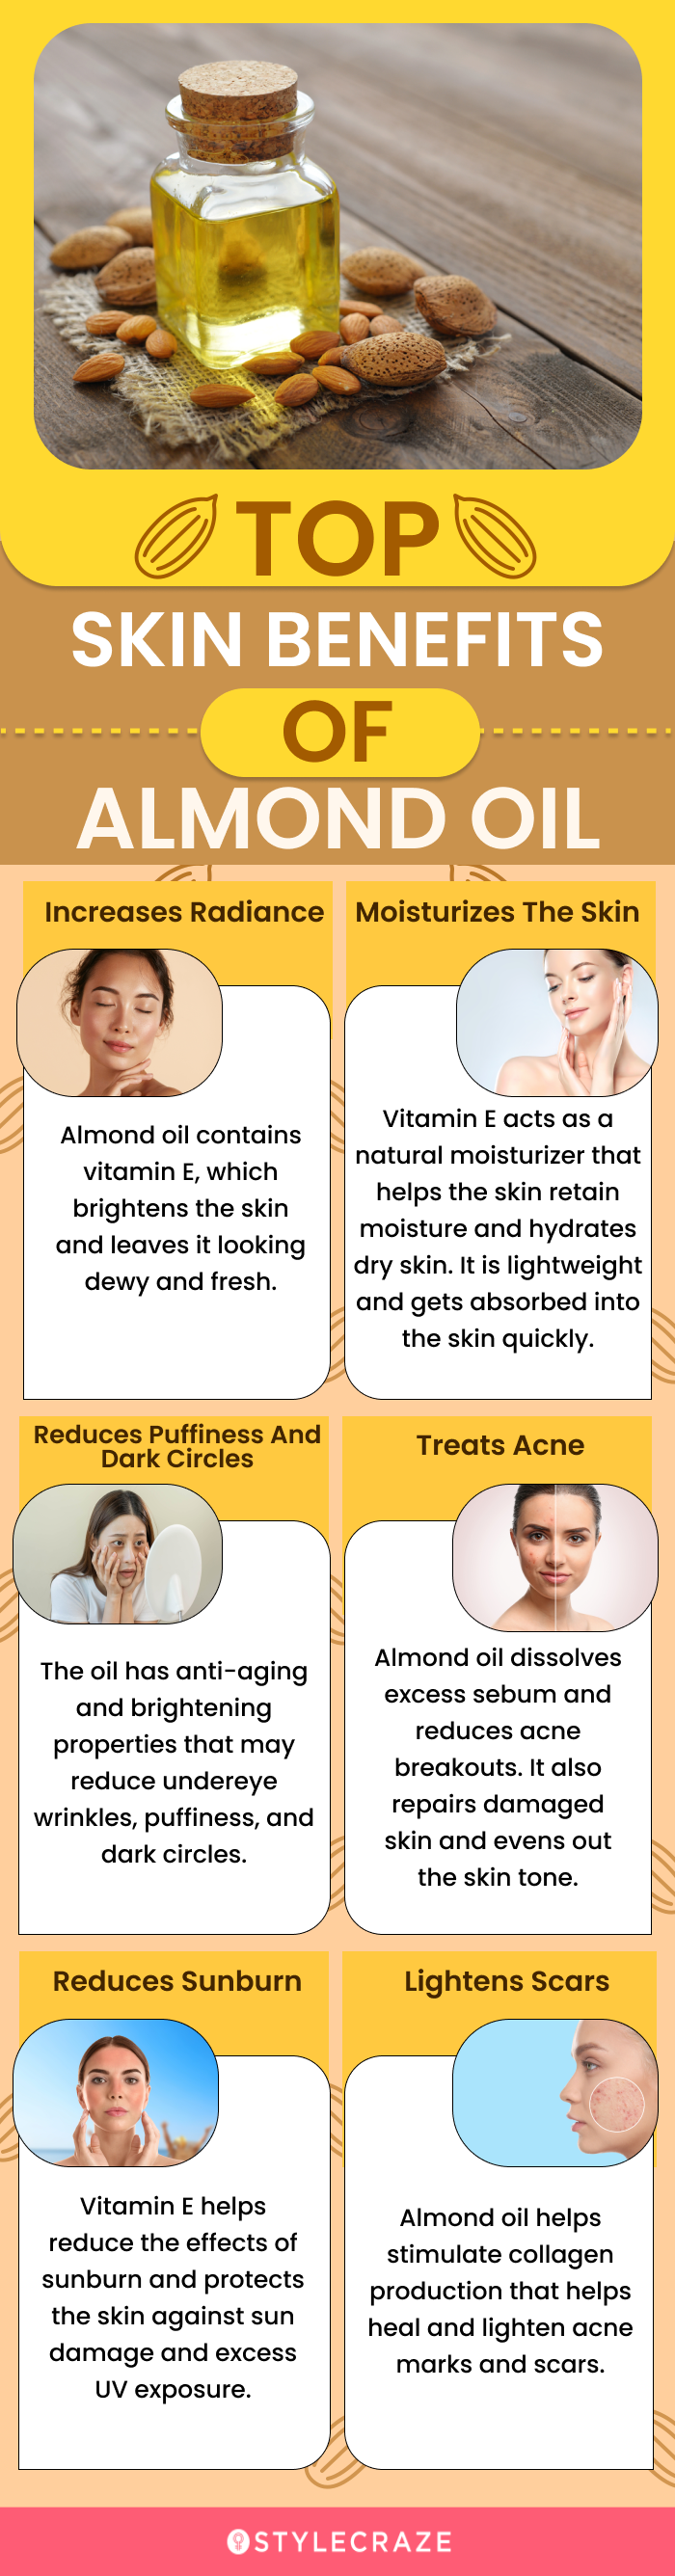 top facial benefits of almond oil (infographic)